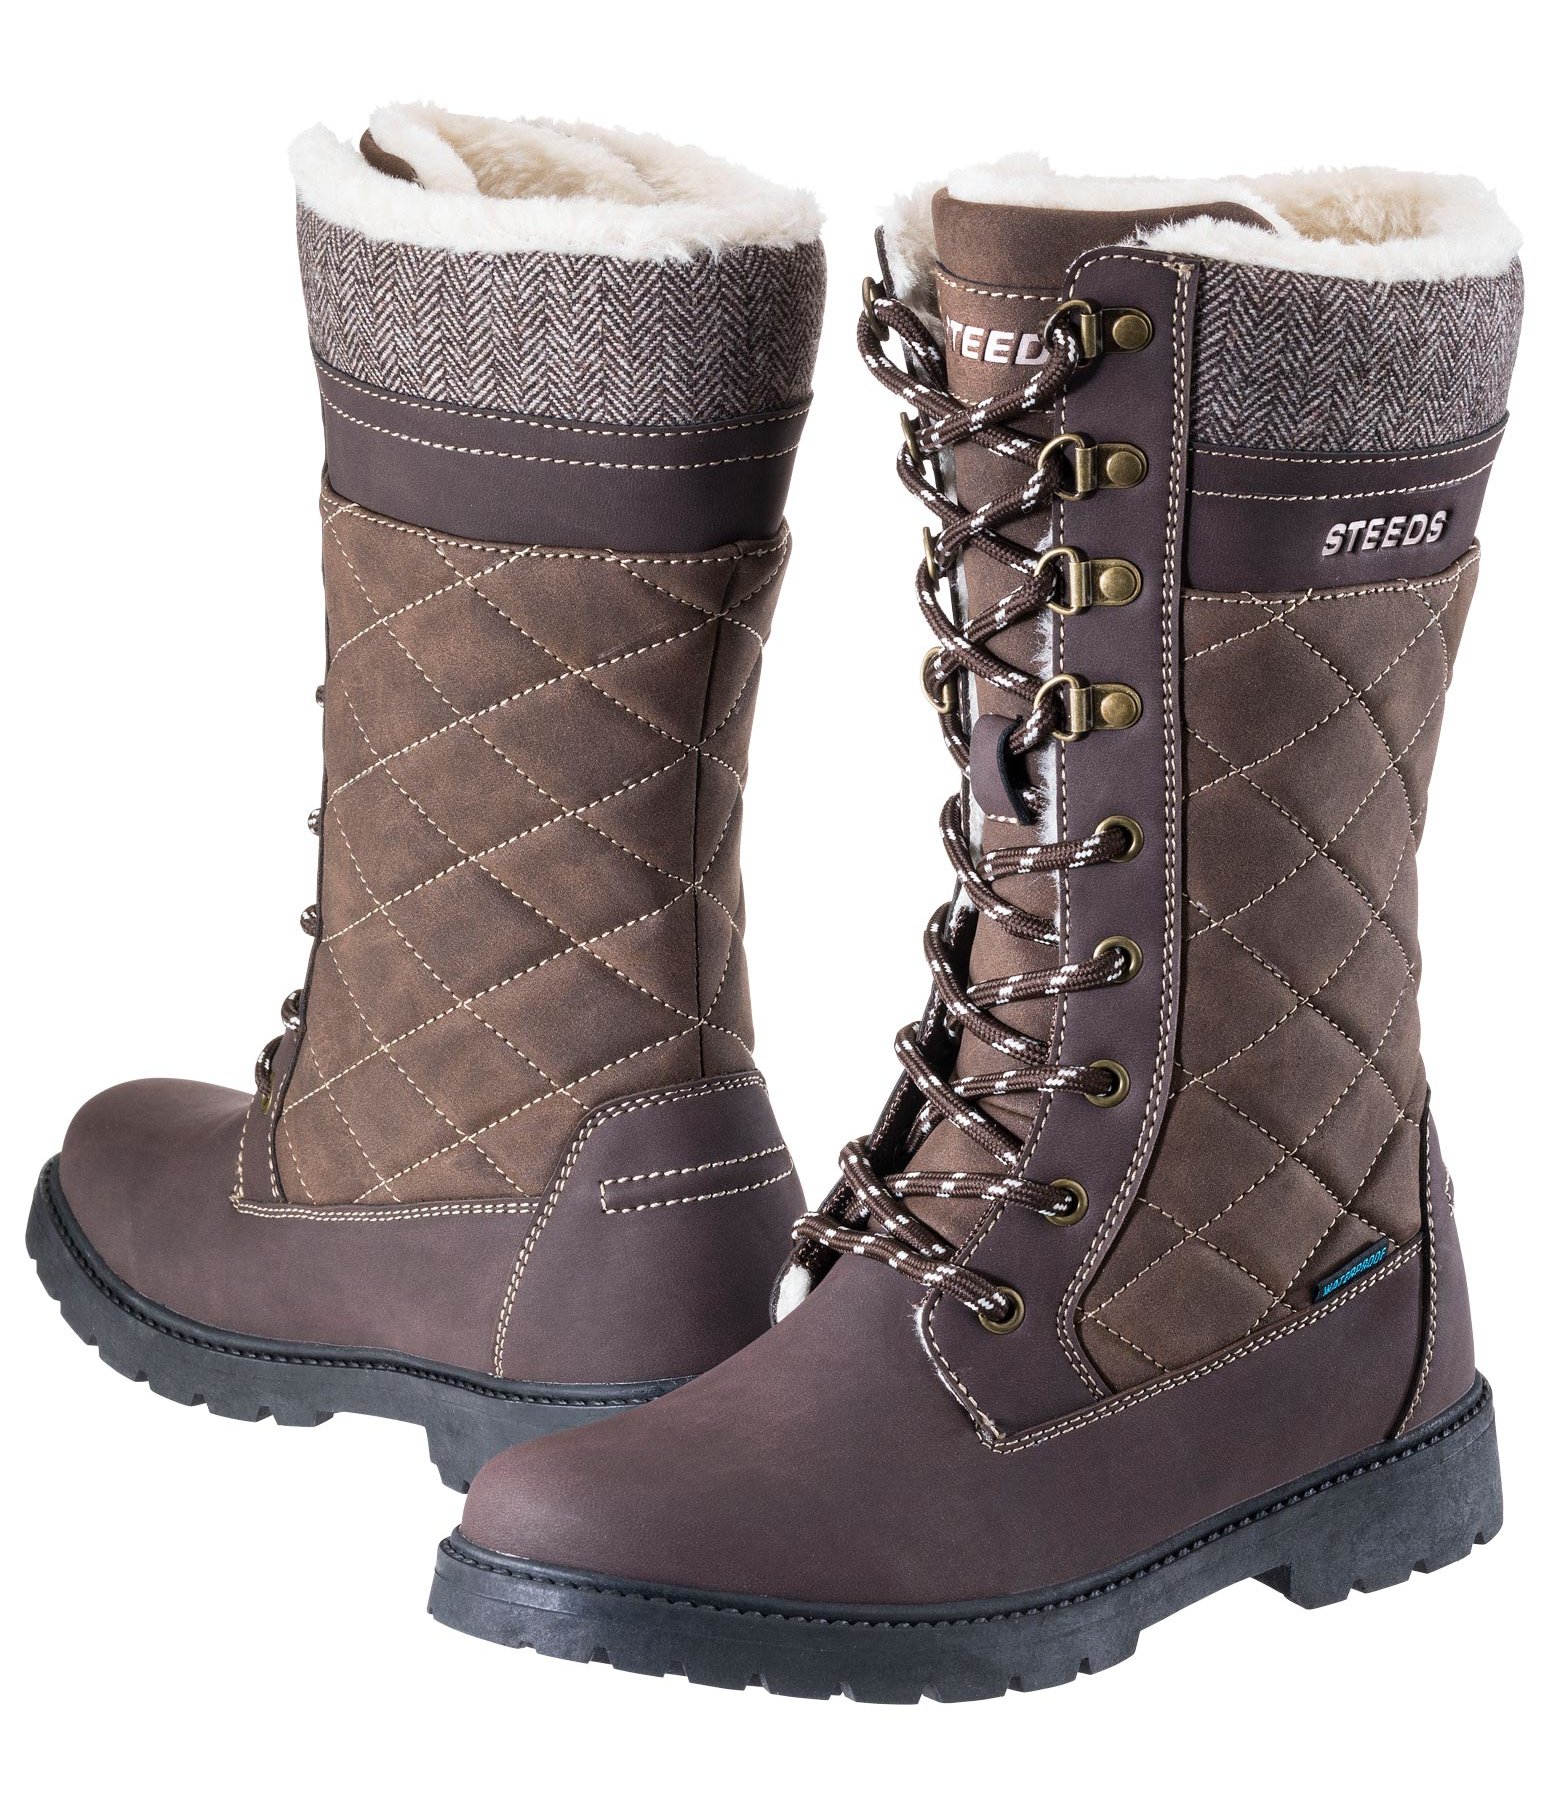 Winter Stable Boots Tundra